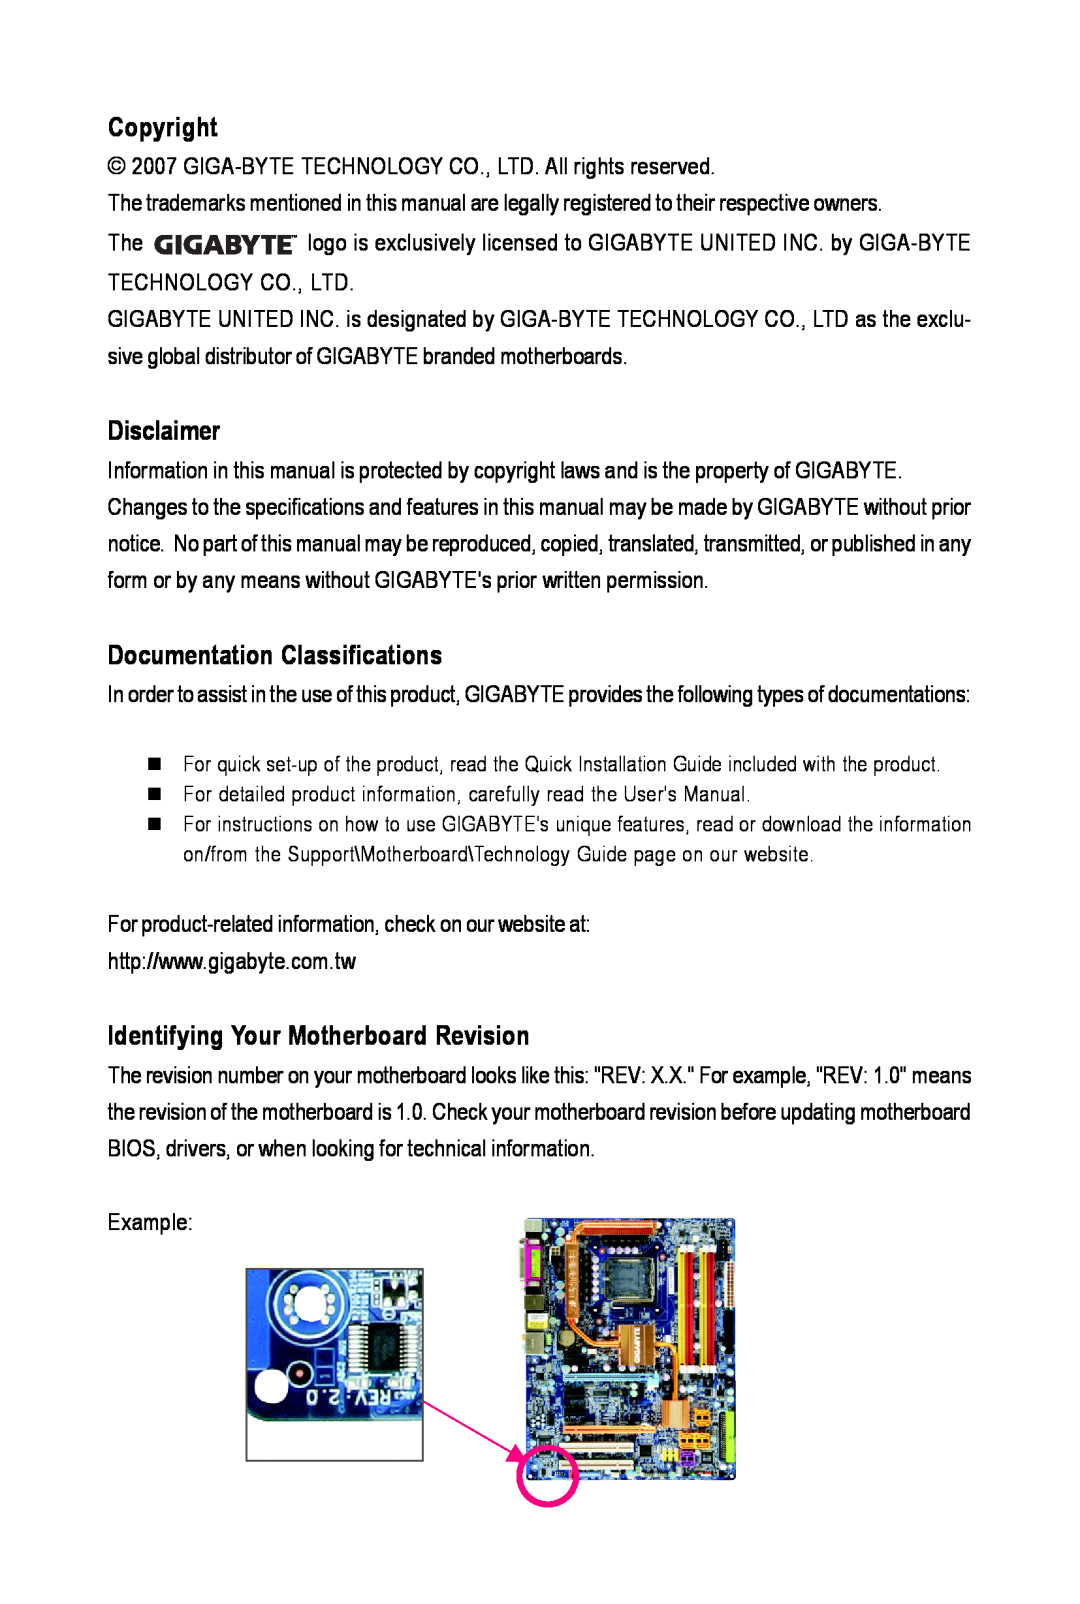 Intel GA-N650SLI-DS4L Copyright, Disclaimer, Documentation Classifications, Identifying Your Motherboard Revision, Example 